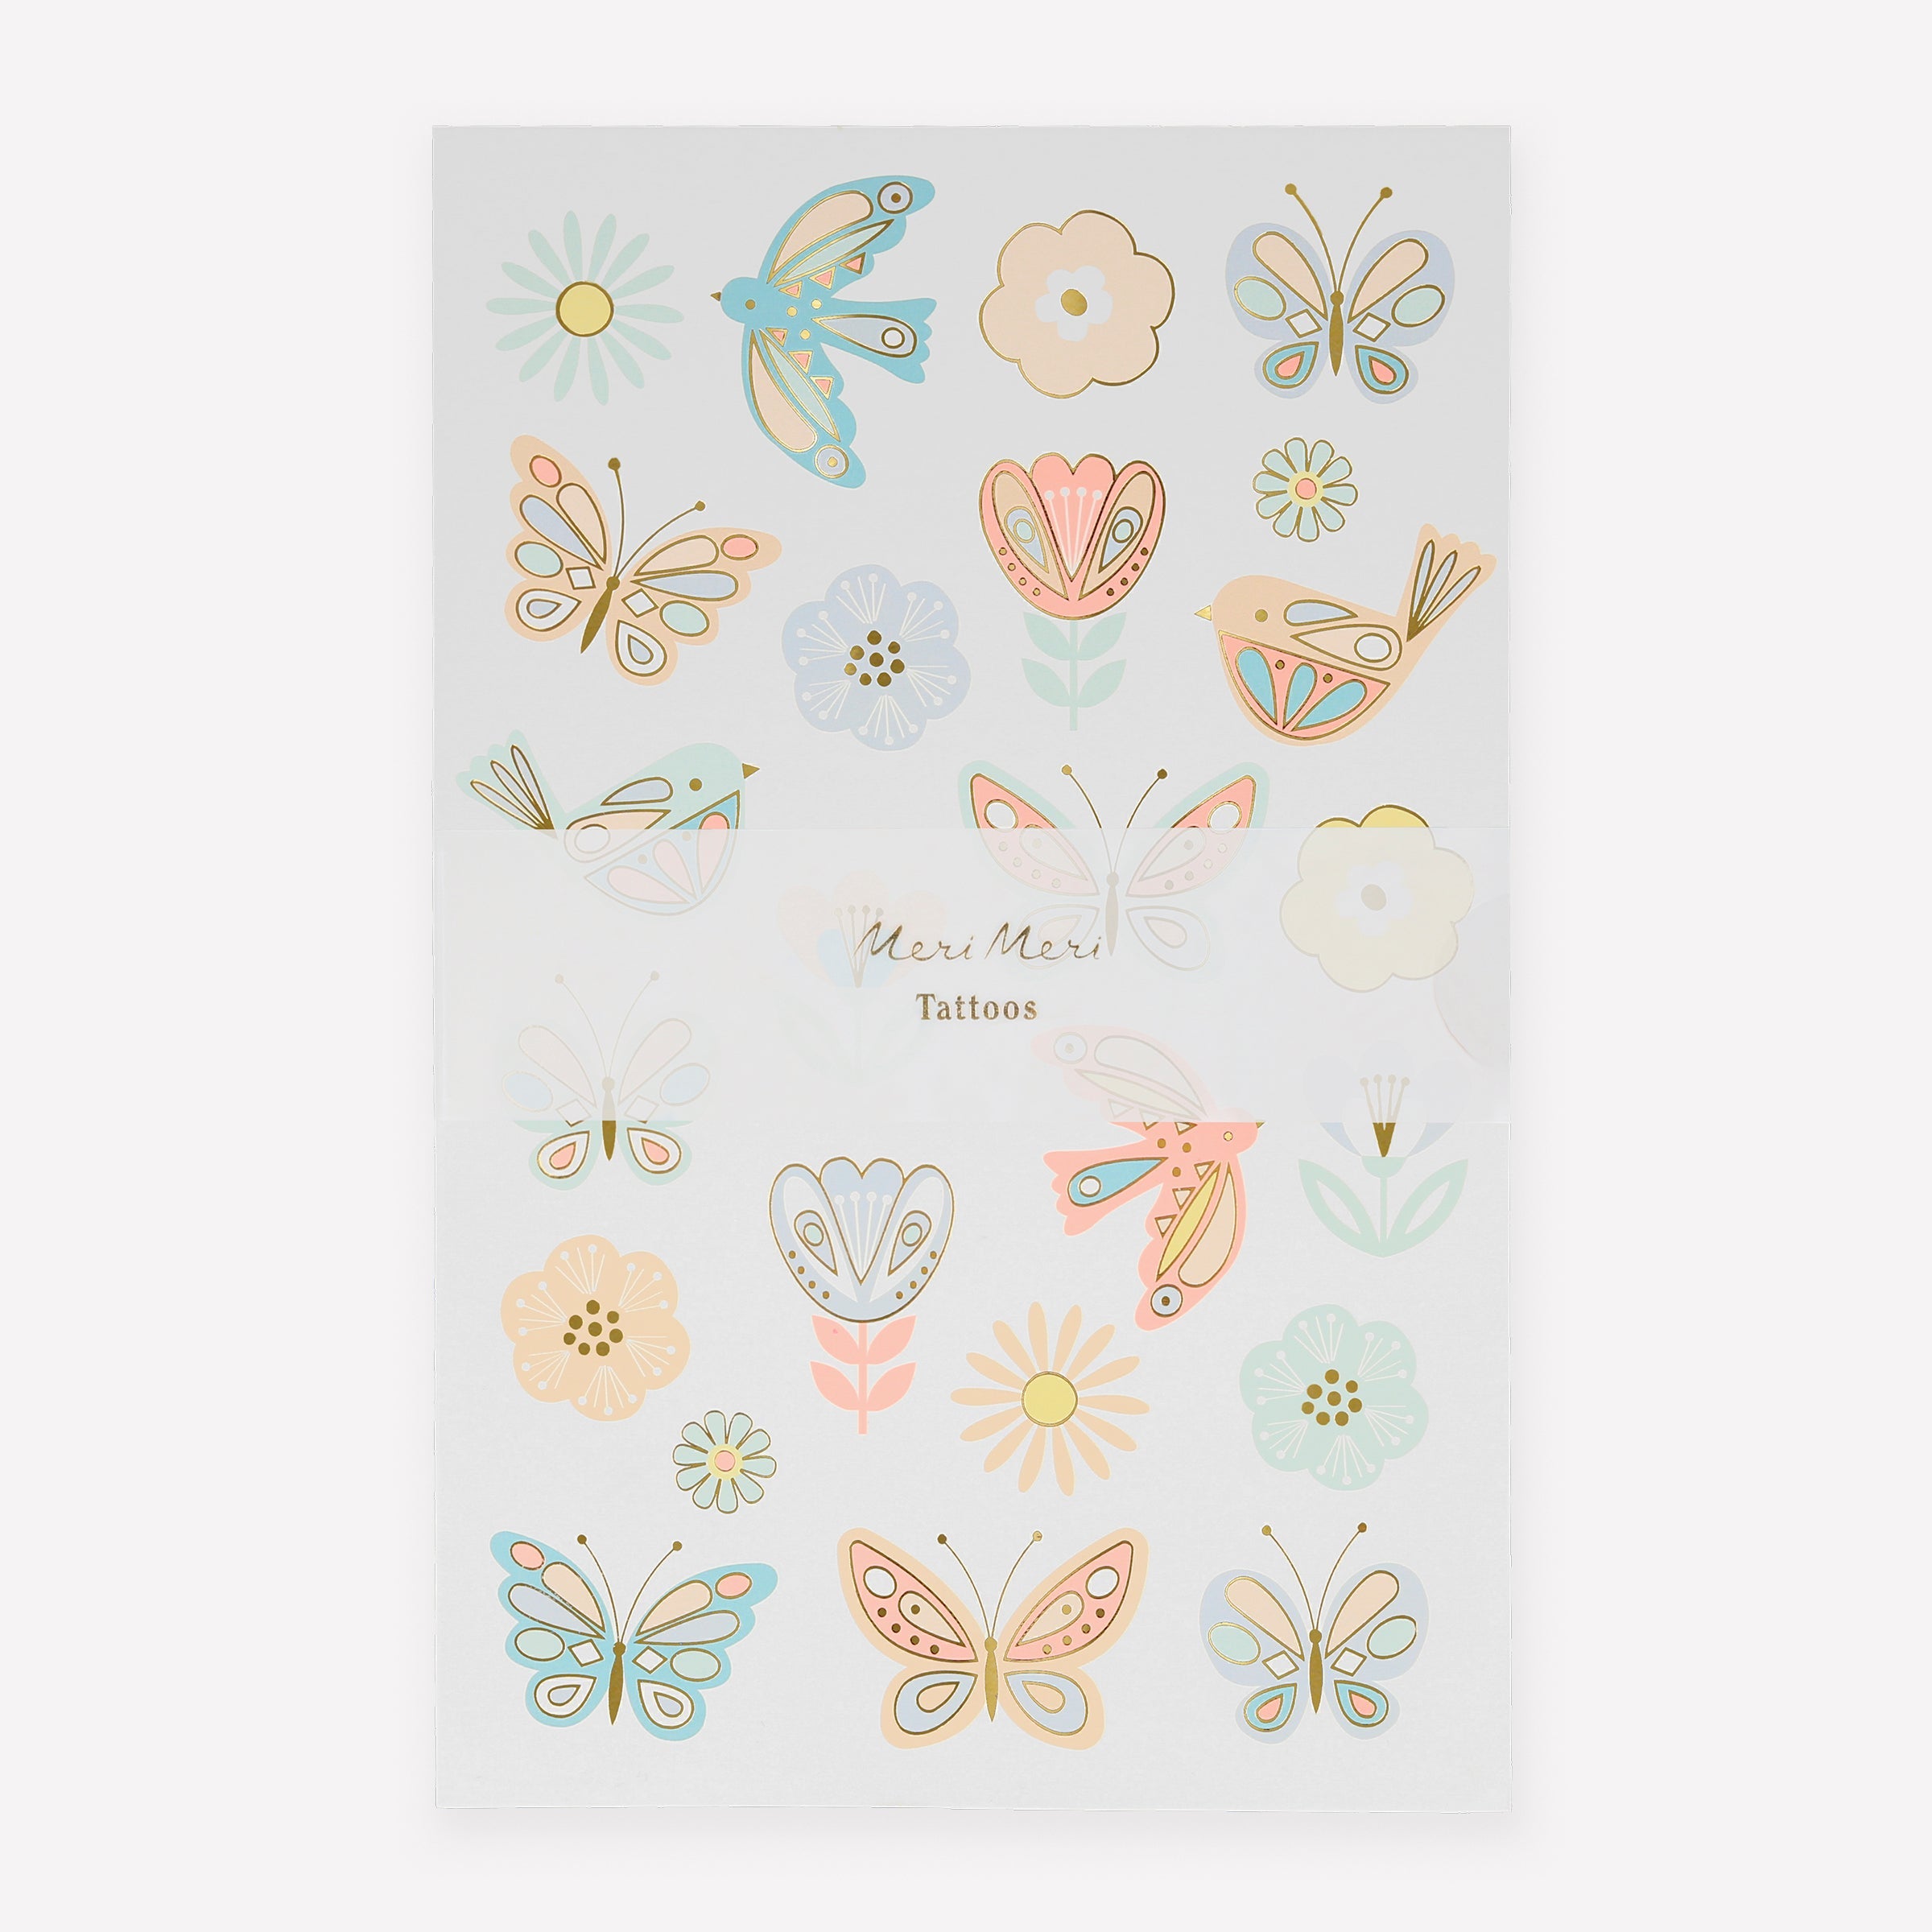 Our temporary tattoos for kids feature birds, flowers and butterflies, perfect for princess birthday party ideas.